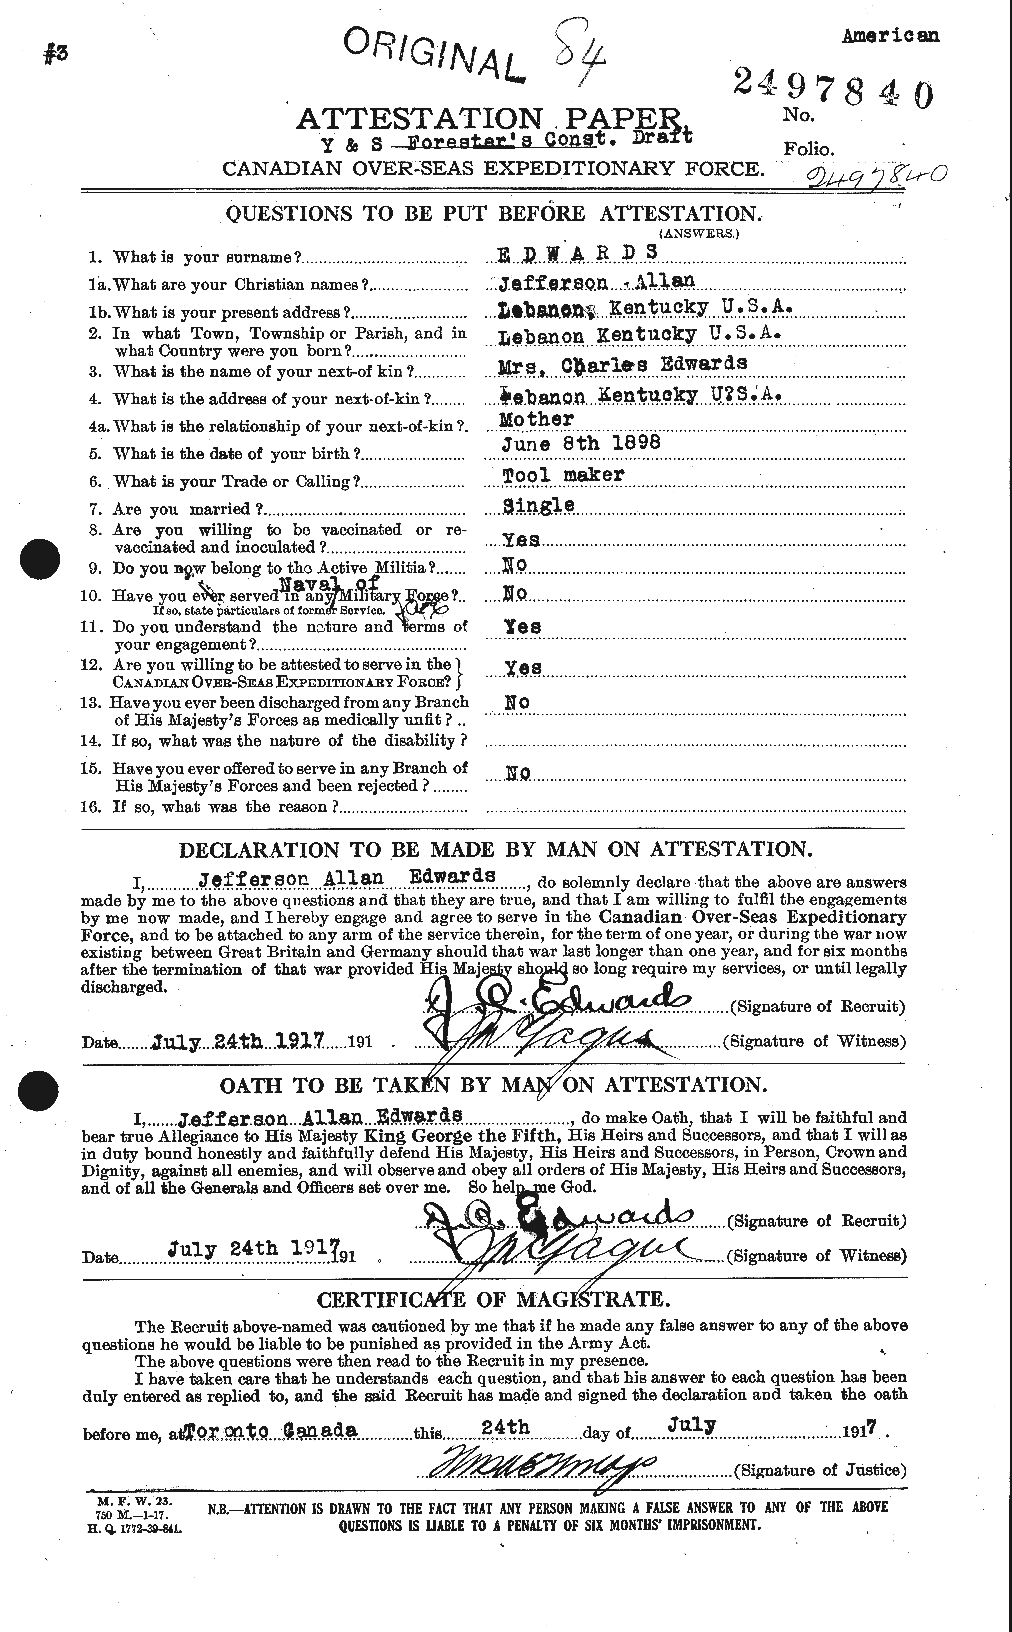 Personnel Records of the First World War - CEF 309825a